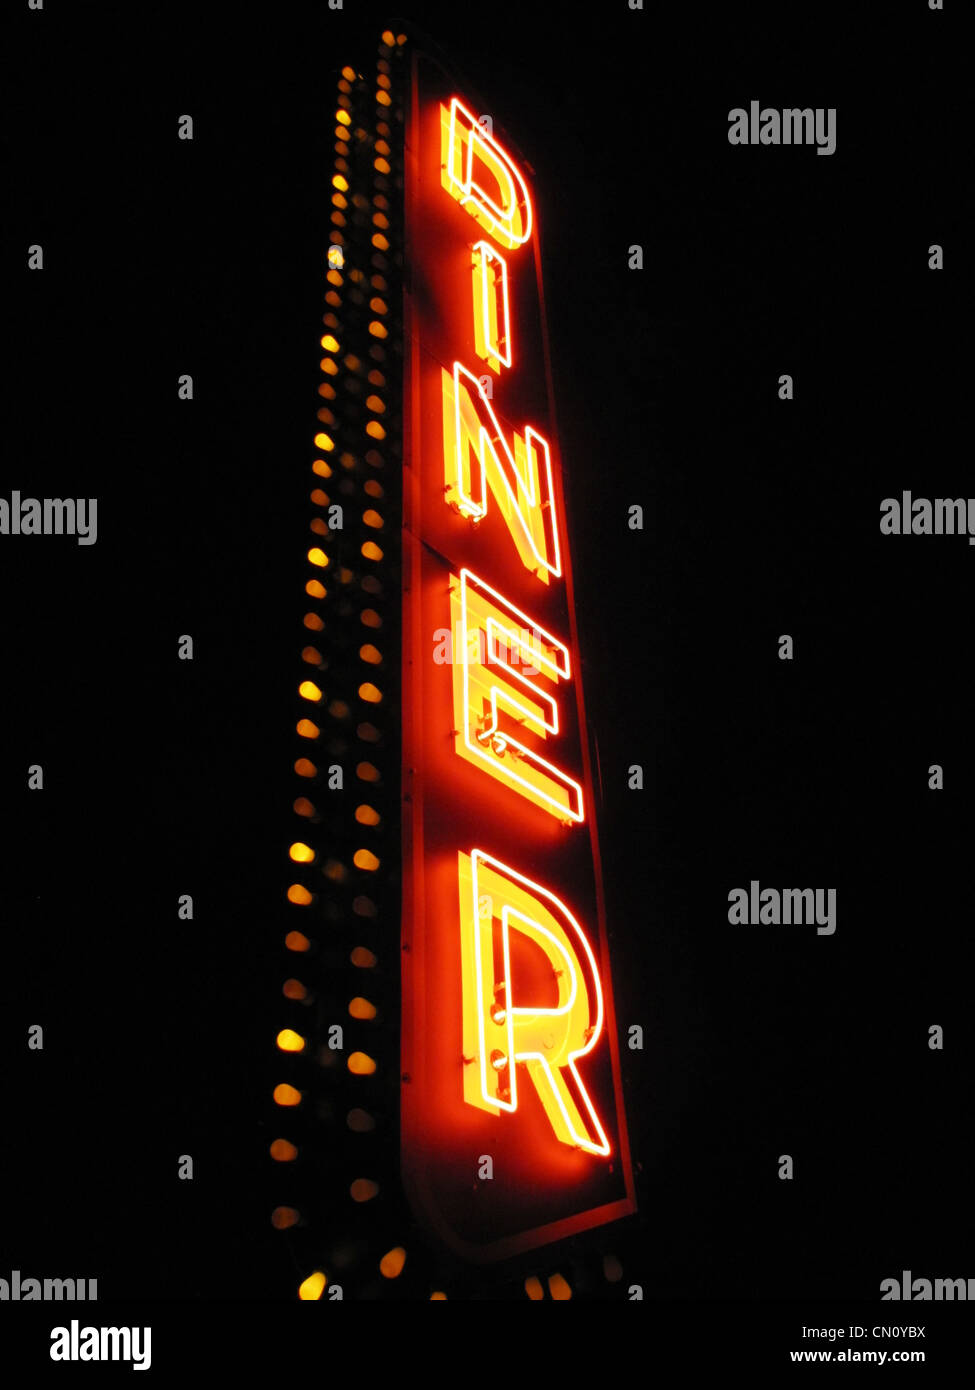 A large neon sign says "DINER" against a black night sky. Stock Photo